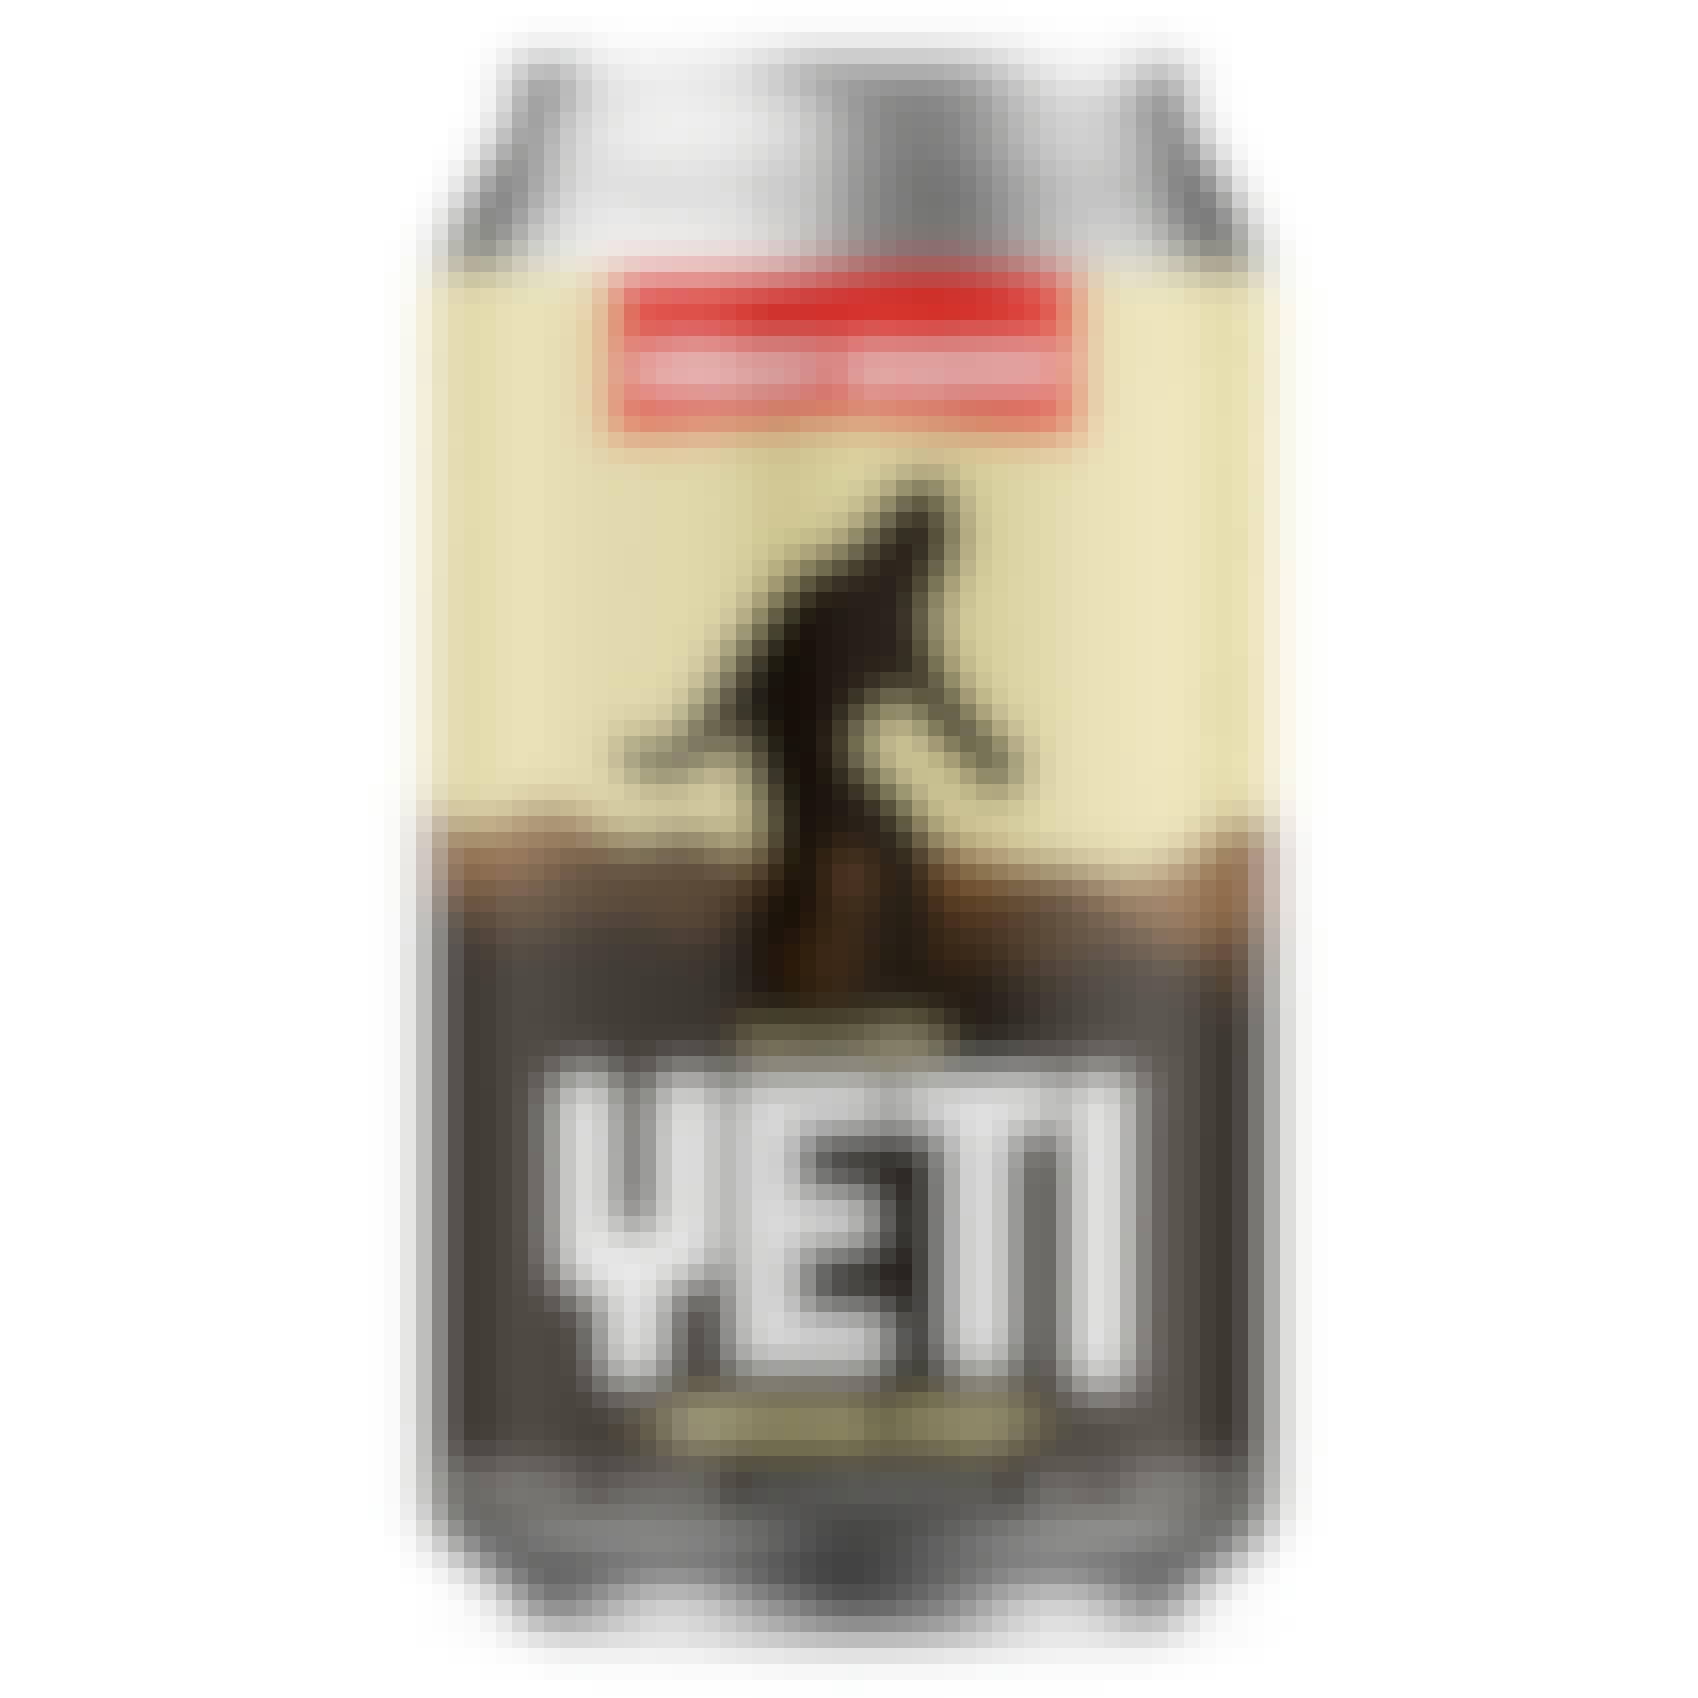 Great Divide Yeti Imperial Stout 6 pack 12 oz. Can